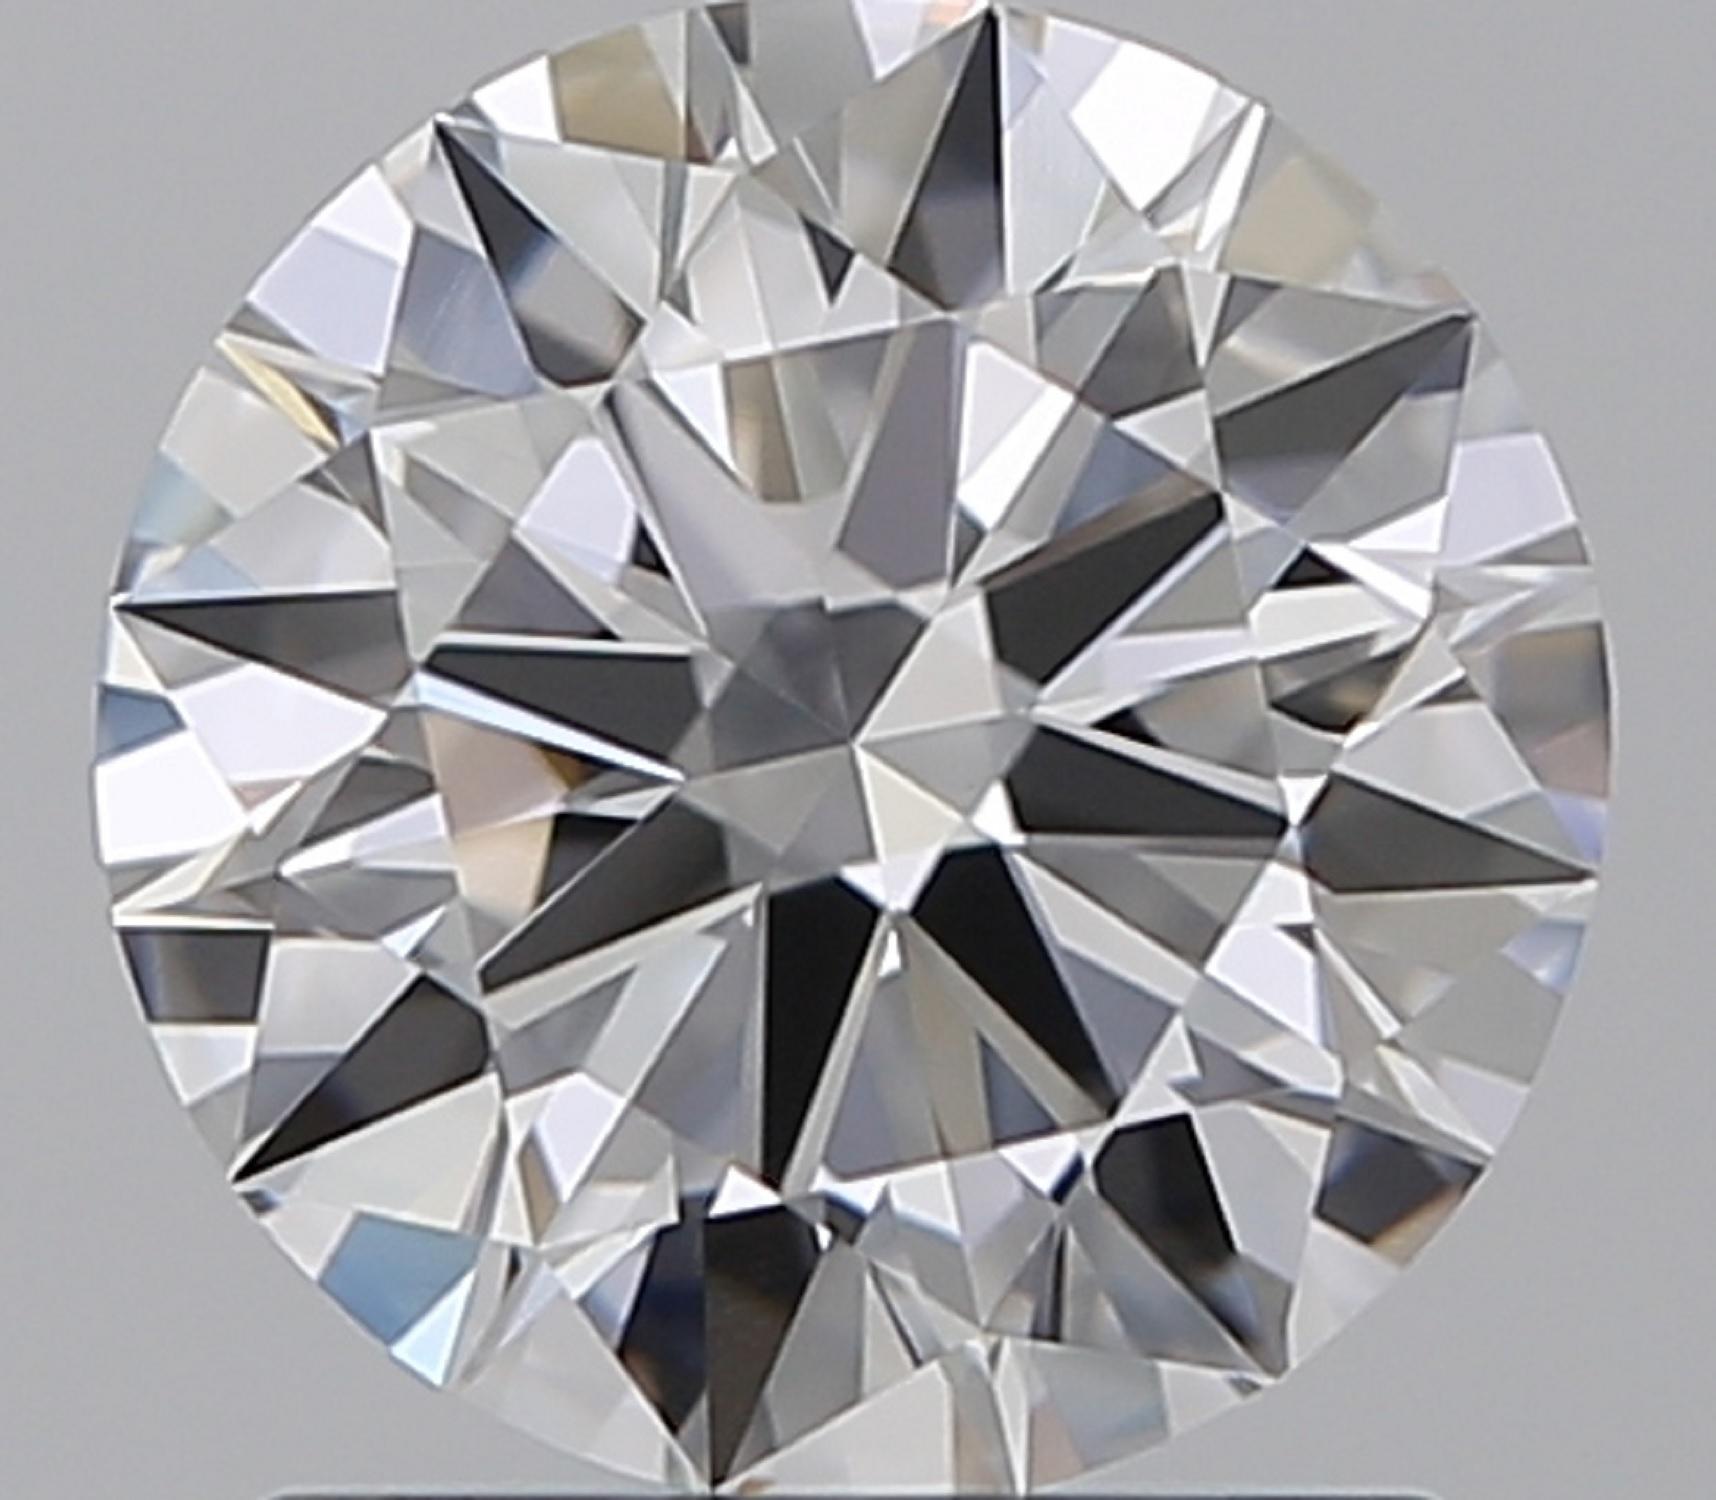 Amazing 2 GIA certified diamond is colorless, 100% eye clean, and displays absolutely phenomenal sparkle! 
The impeccable finishing and magnificent cut creates an absolutely mesmerizing play of light! Its sparkle is dazzlingly bright and lively with